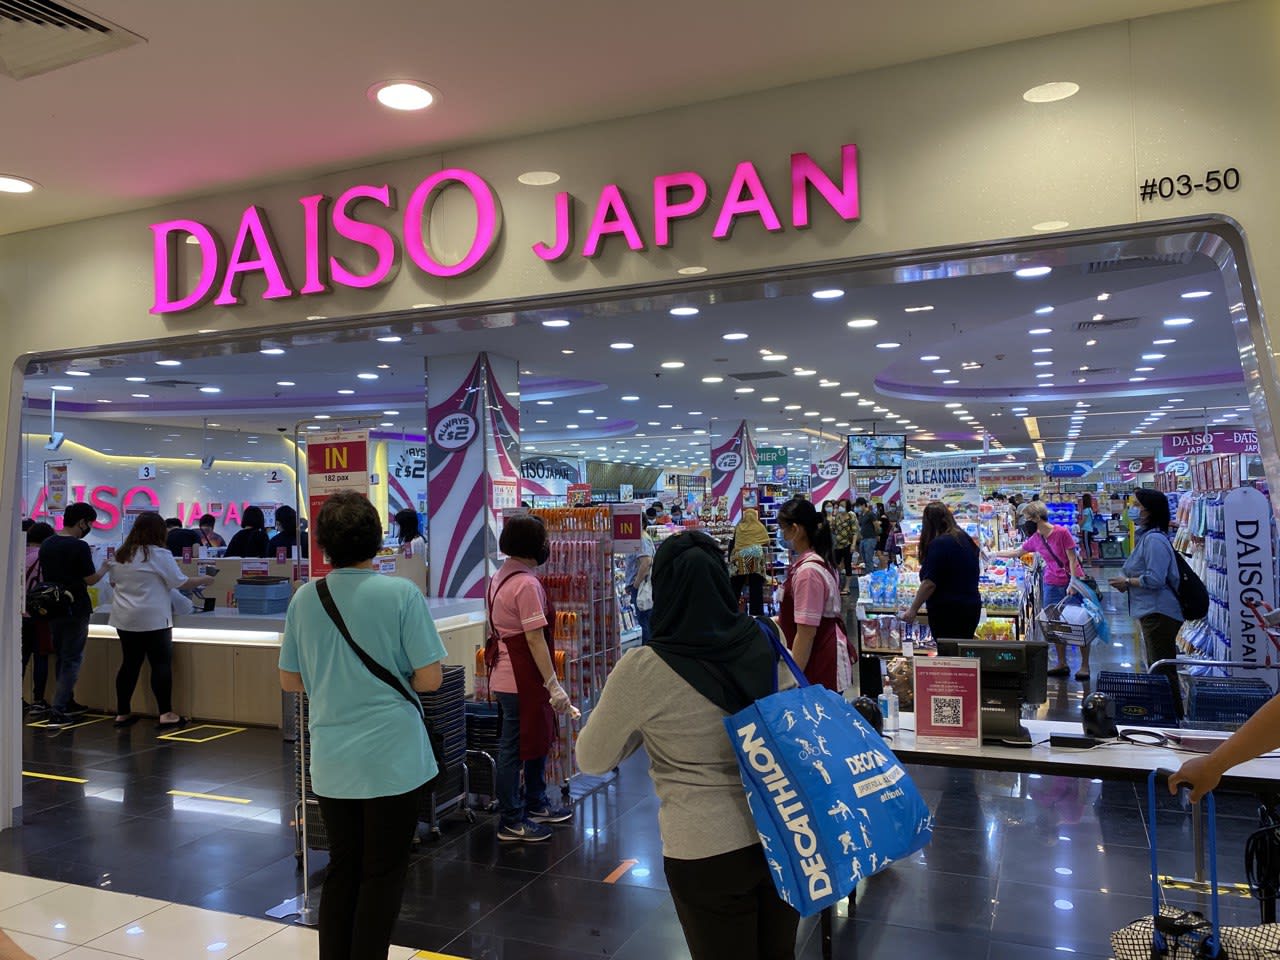 Daiso S’pore To Start Charging GST From May 1, 2022